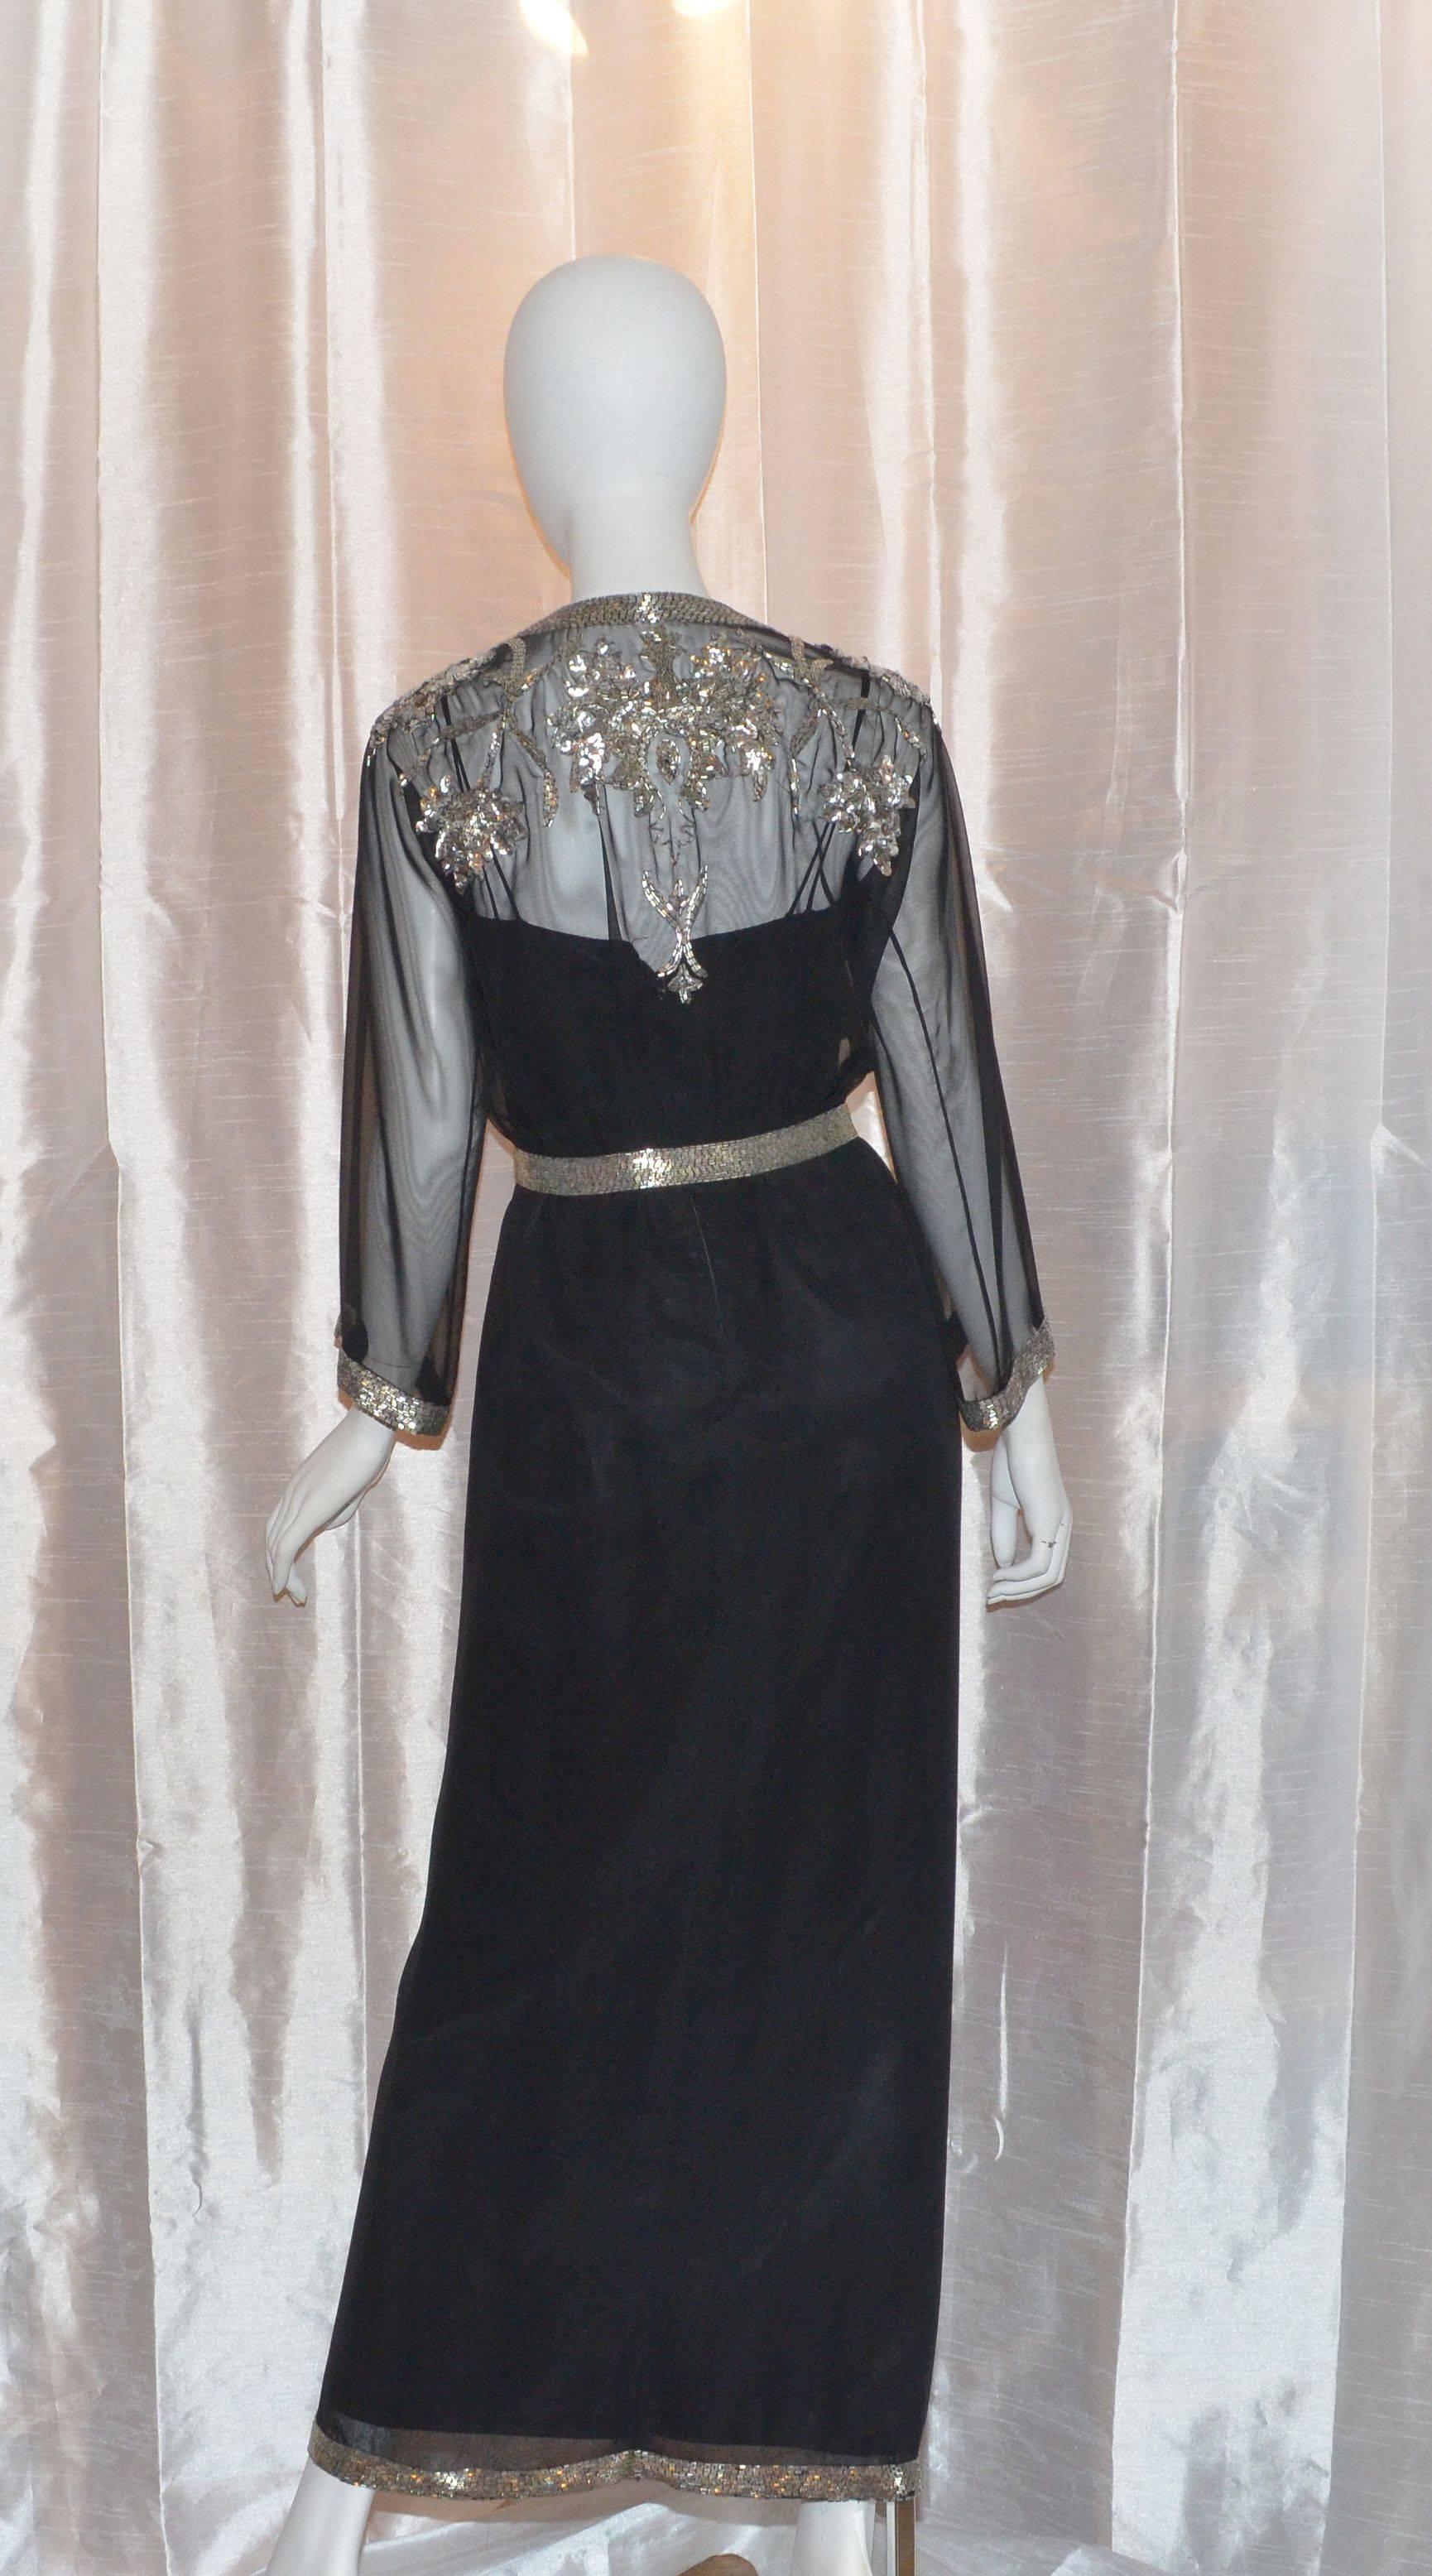 Michael Novarese Sheer Sequin Beaded Slit Front Gown and Jacket of exquisite quality and construction

Vintage Michael Novarese ensemble features a cropped sheer blouse cover with silver beading and sequin detailing at the front and back, as well